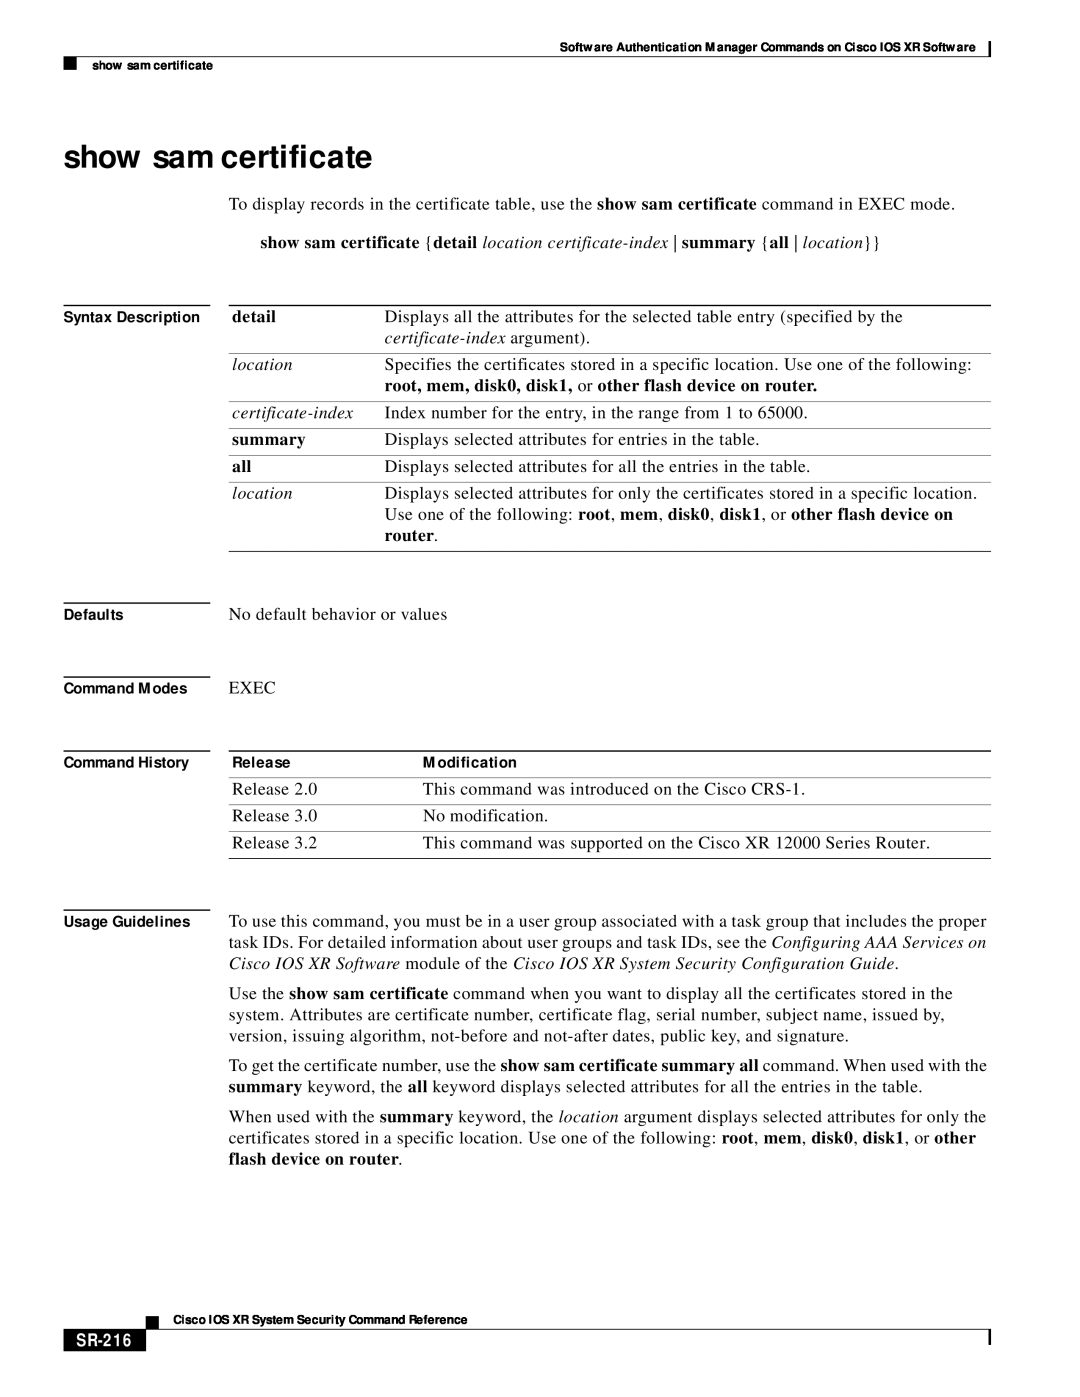 Cisco Systems SR-207 manual show sam certificate, detail, summary, router, Defaults, SR-216, Command Modes Command History 